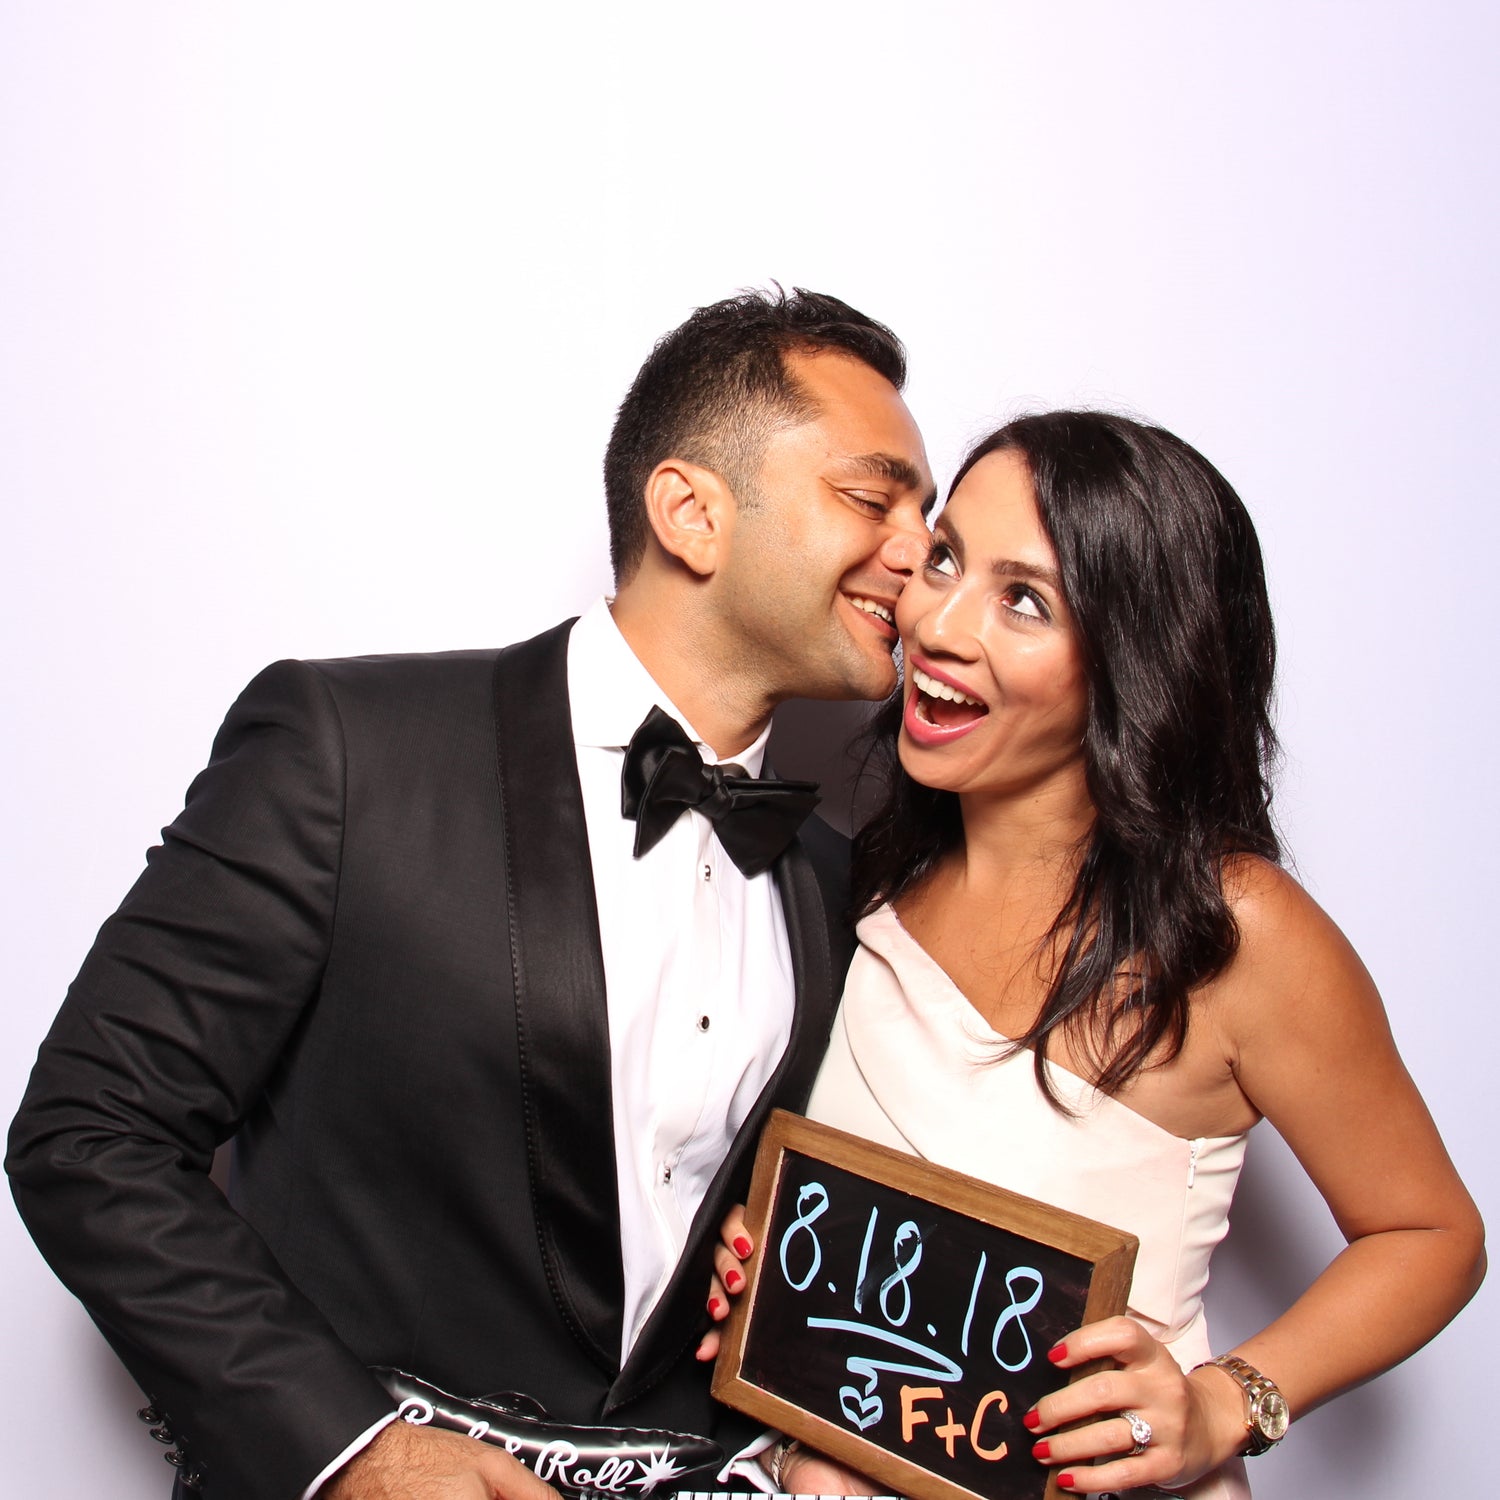 Couple having fun in a photo booth at a black tie event